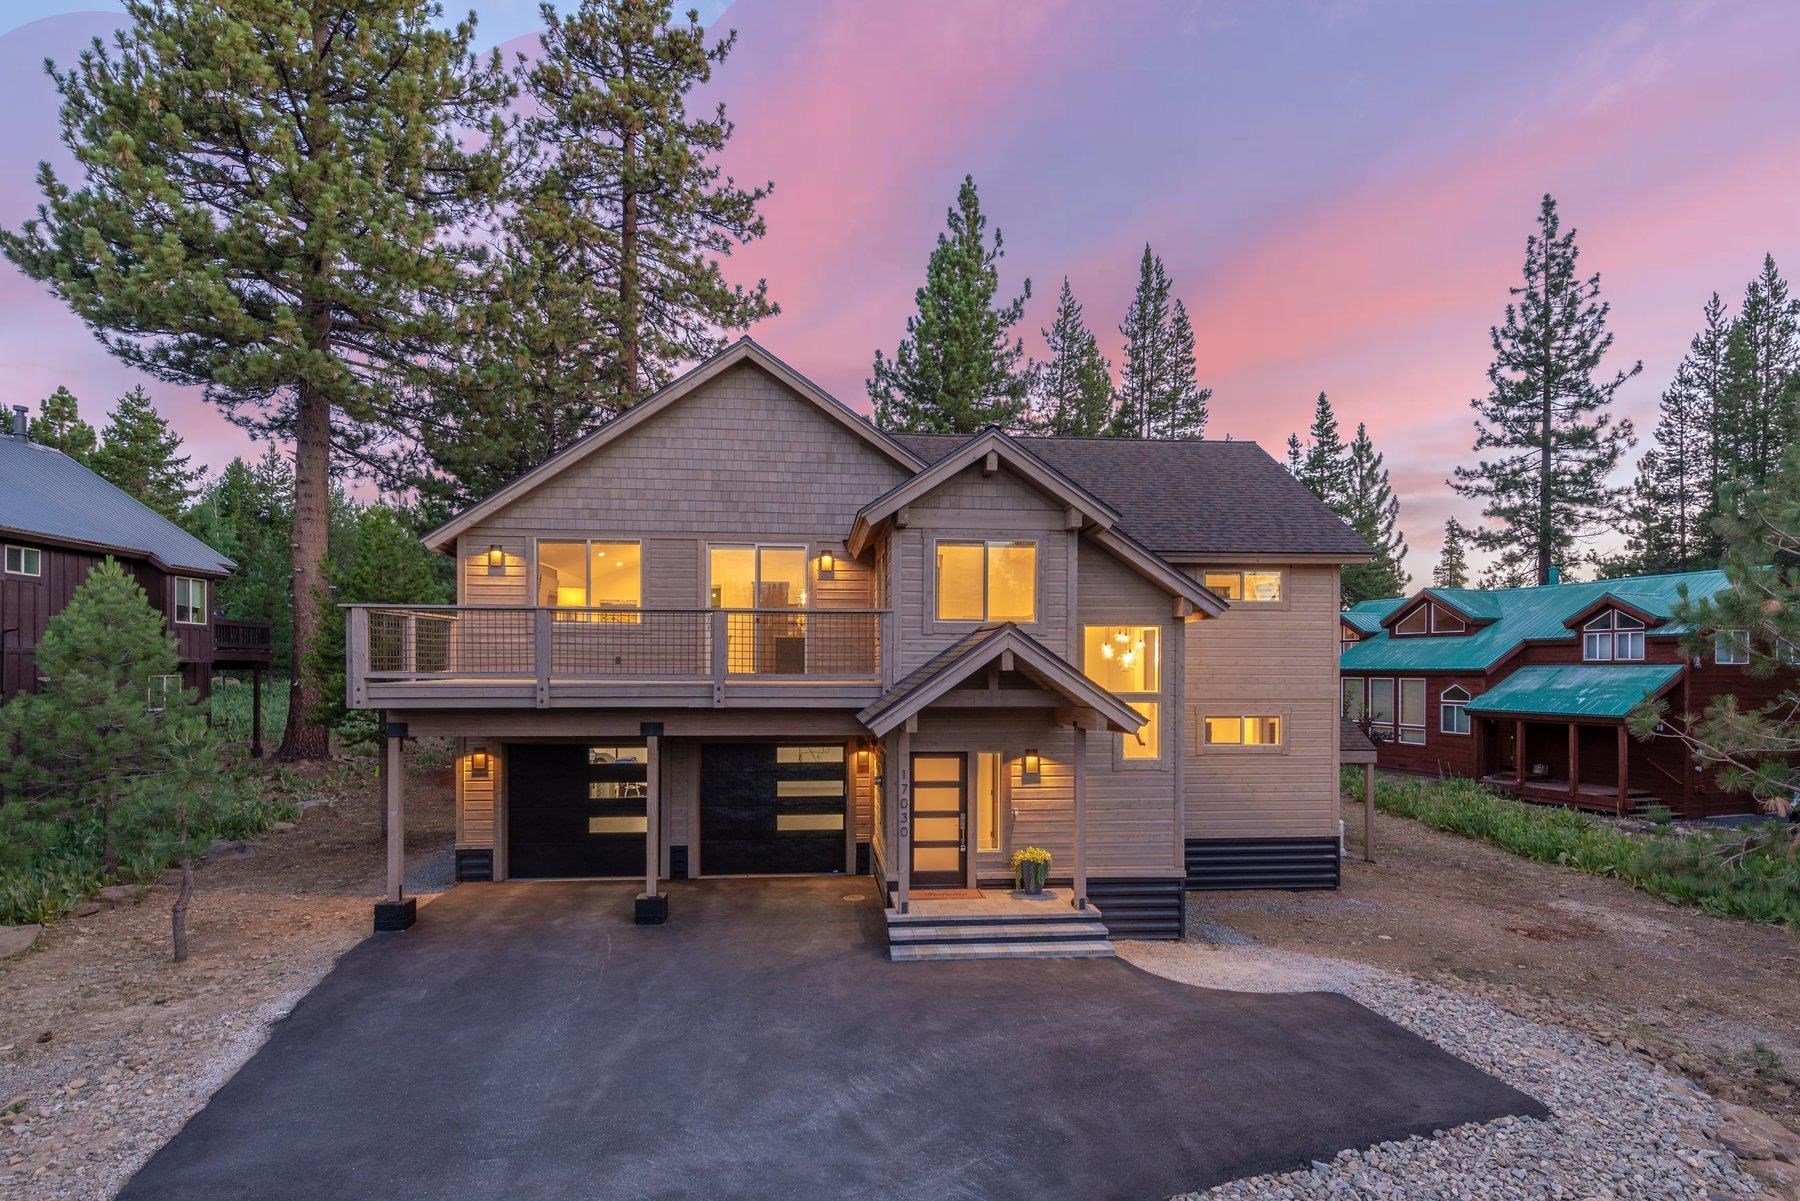 Image for 17030 Skislope Way, Truckee, CA 96161